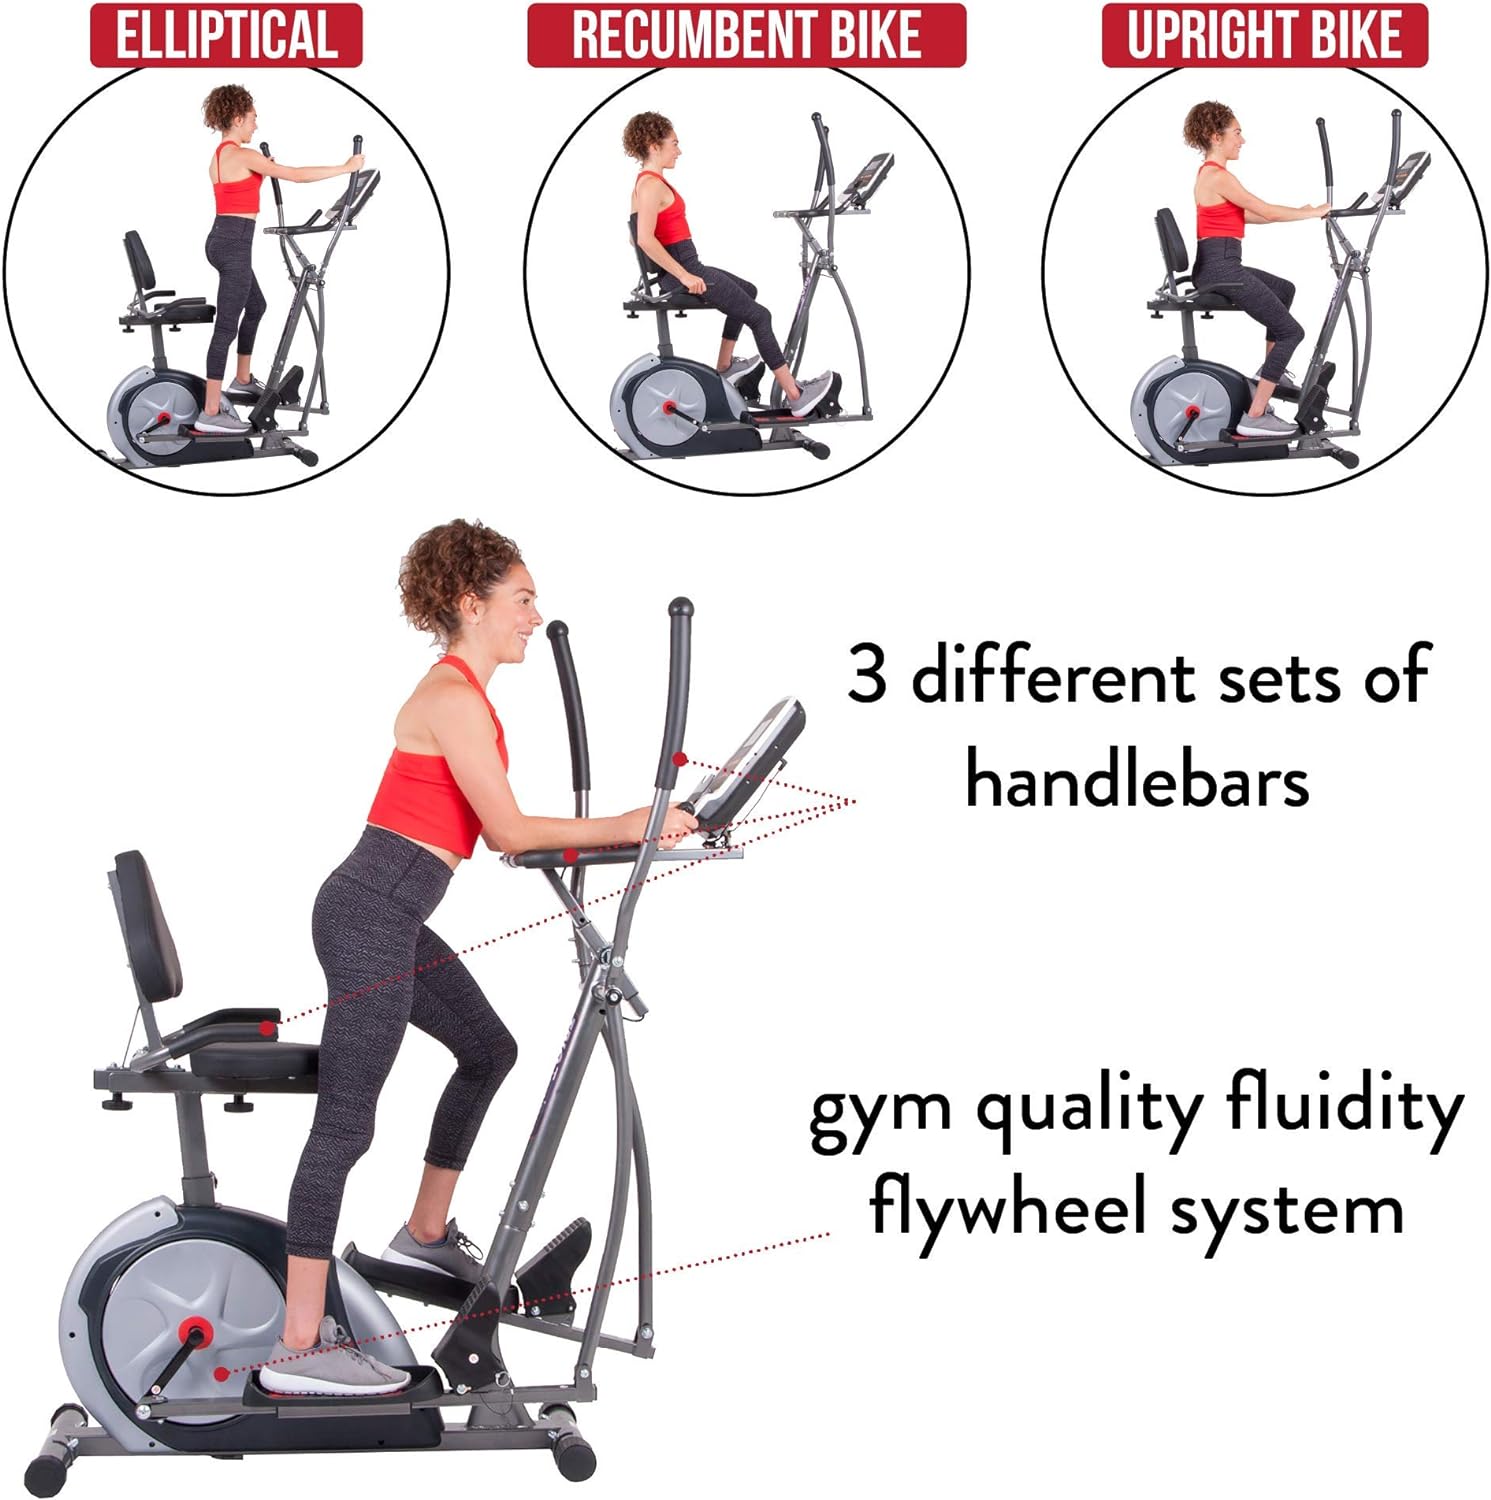 Body Champ 3-in-1 Home Gym, Upright Exercise Bike, Elliptical Machine  Recumbent Bike, Trio Trainer Exercise Machine Plus Two Upper Body Options, Silver, BRT7989